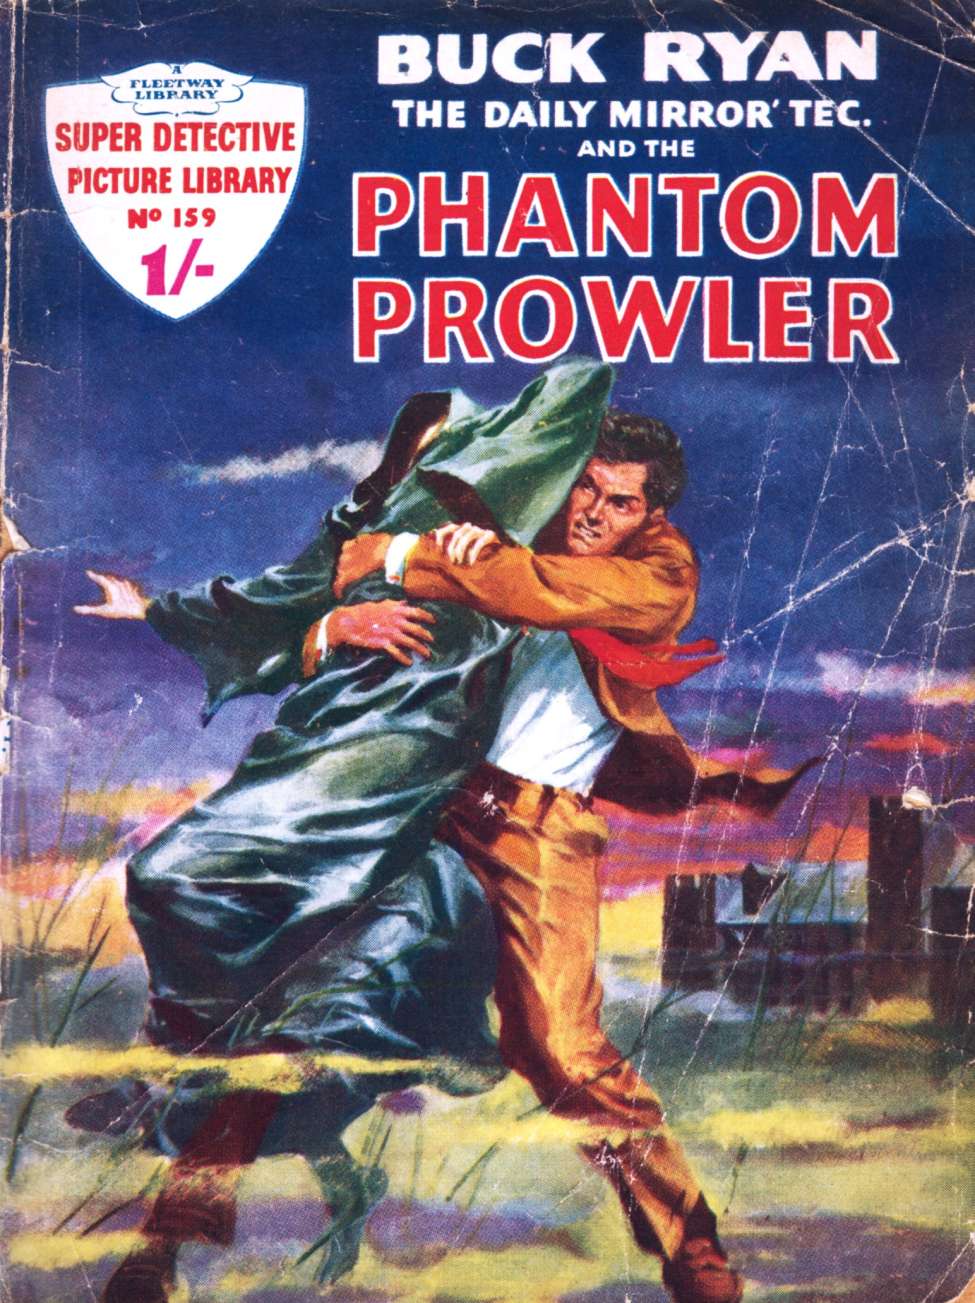 Book Cover For Super Detective Library 159 - Buck Ryan and The Phantom Prowler